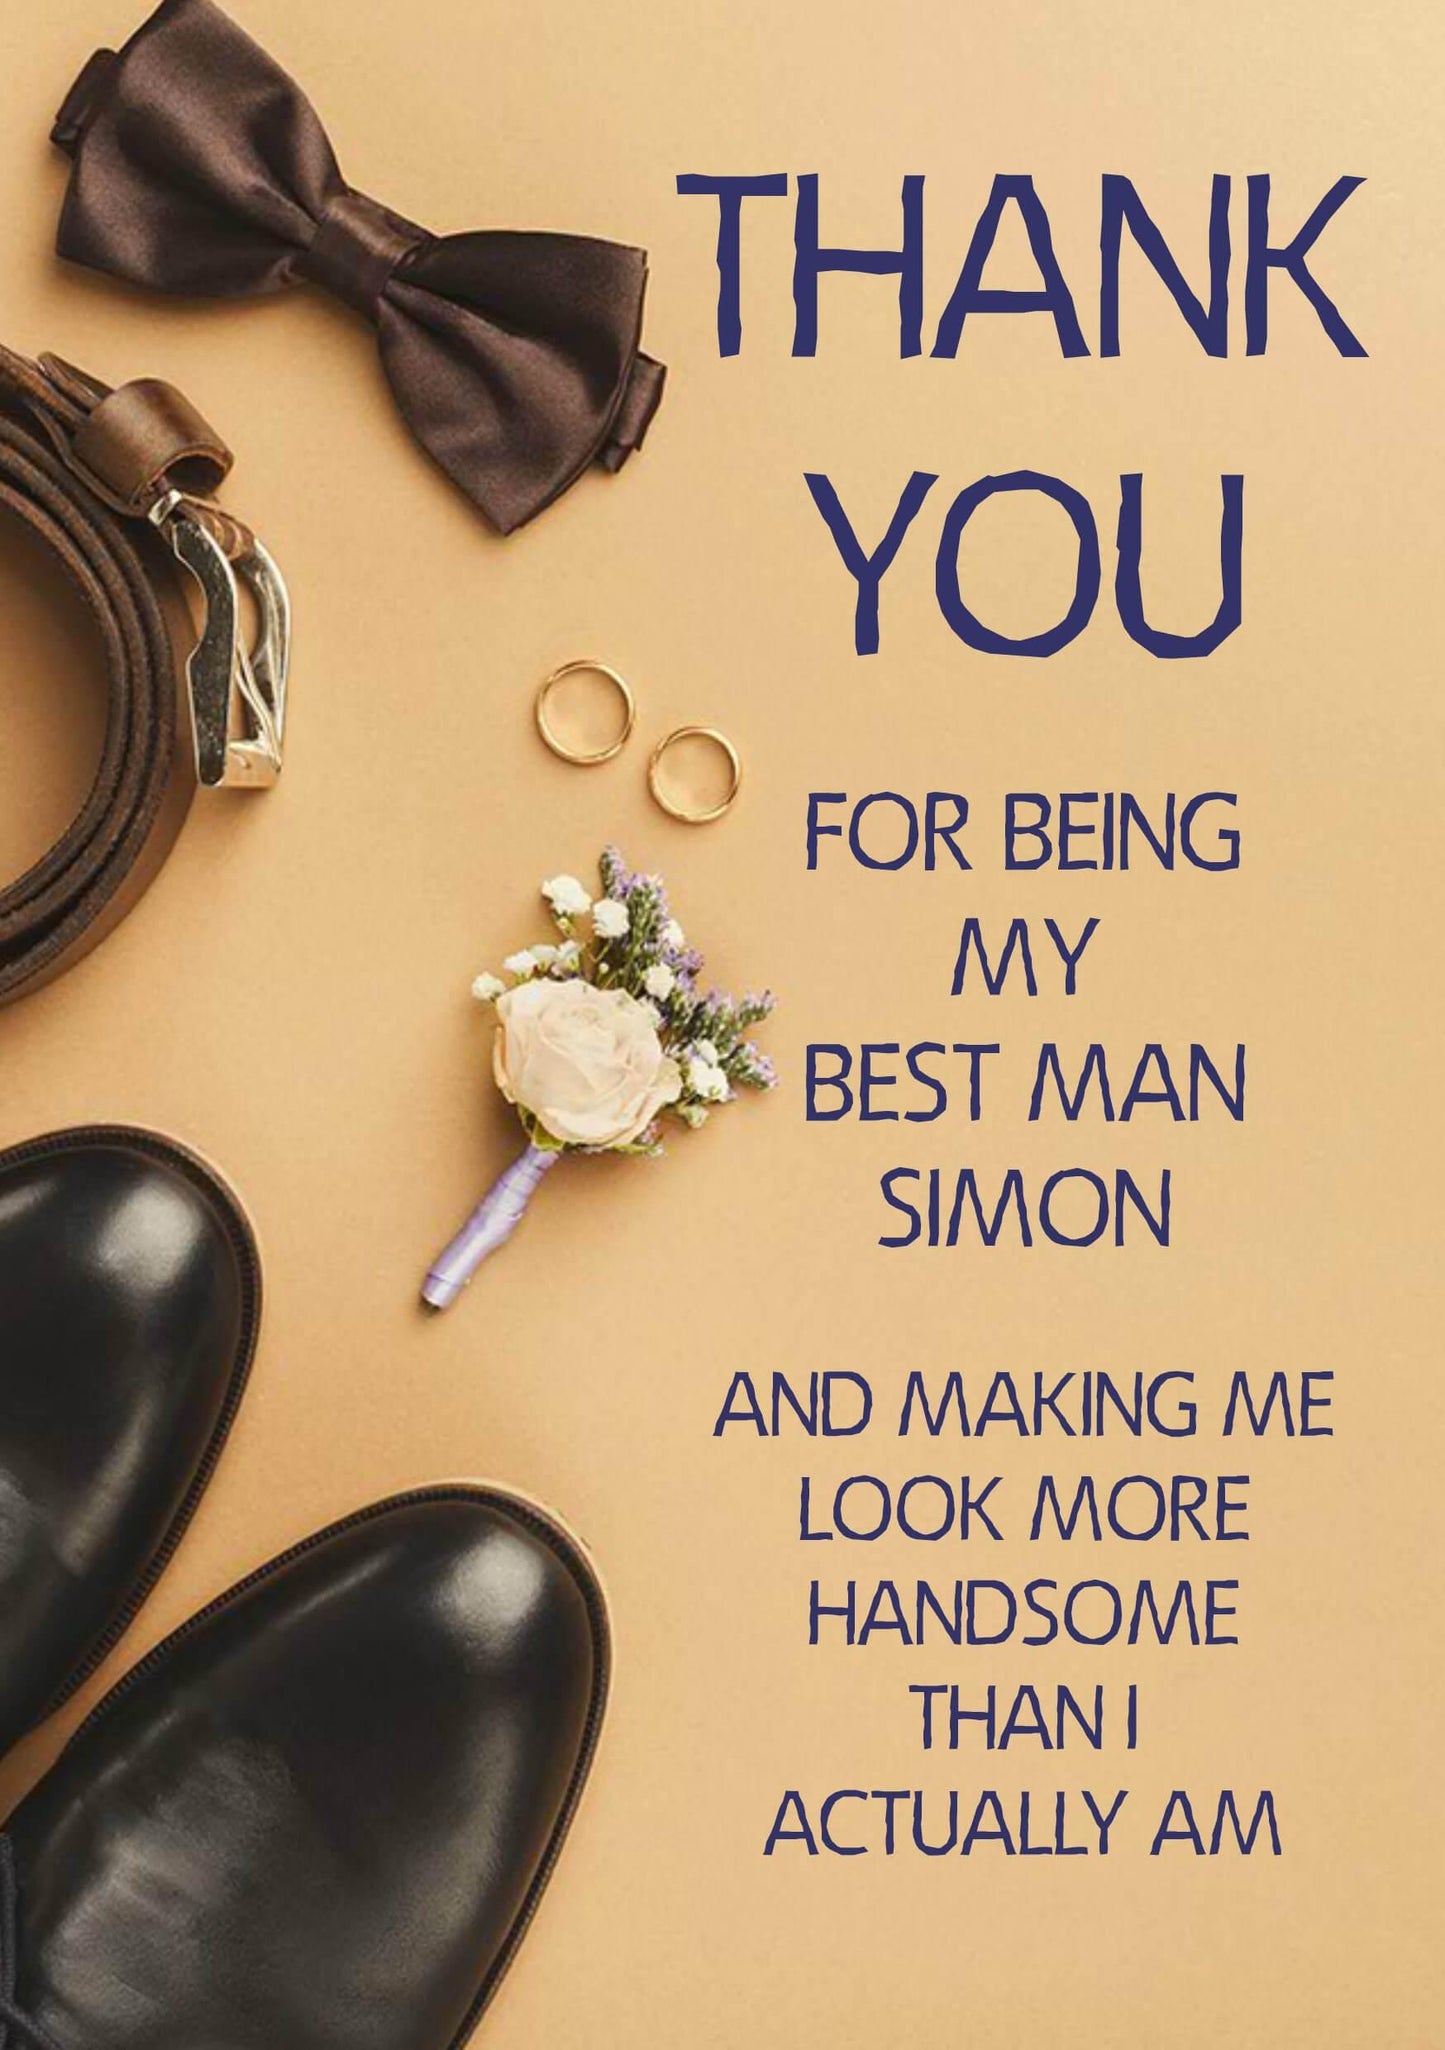 A greeting card for Look Handsome Simon, Twisted Gifts.